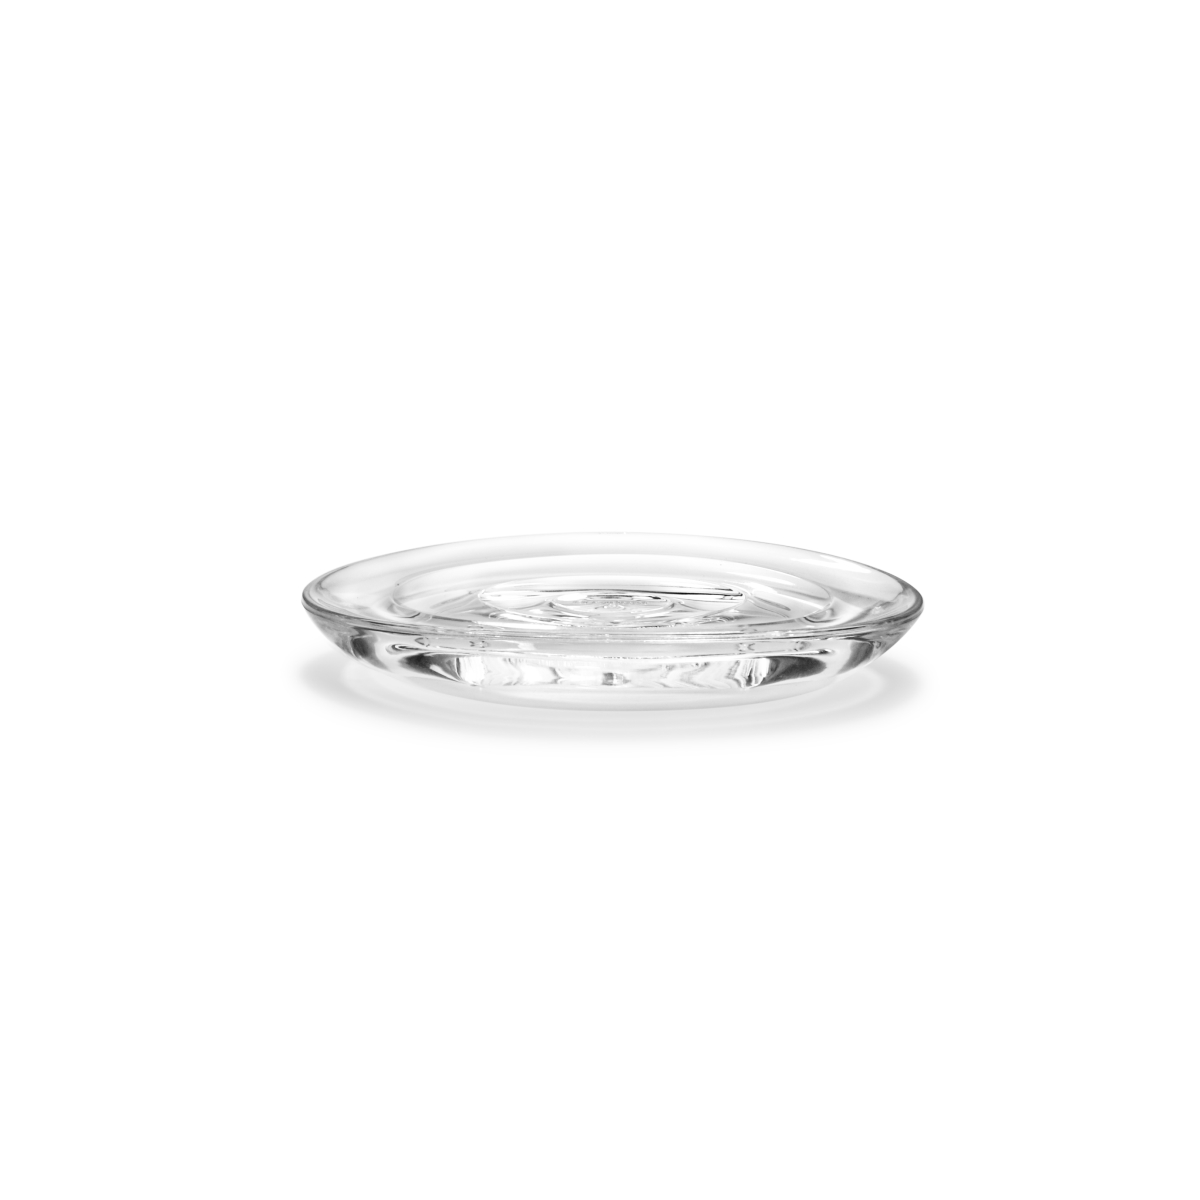 Picture of Umbra 020162-165 Droplet Acrylic Soap Dish Container for Bathroom - Clear